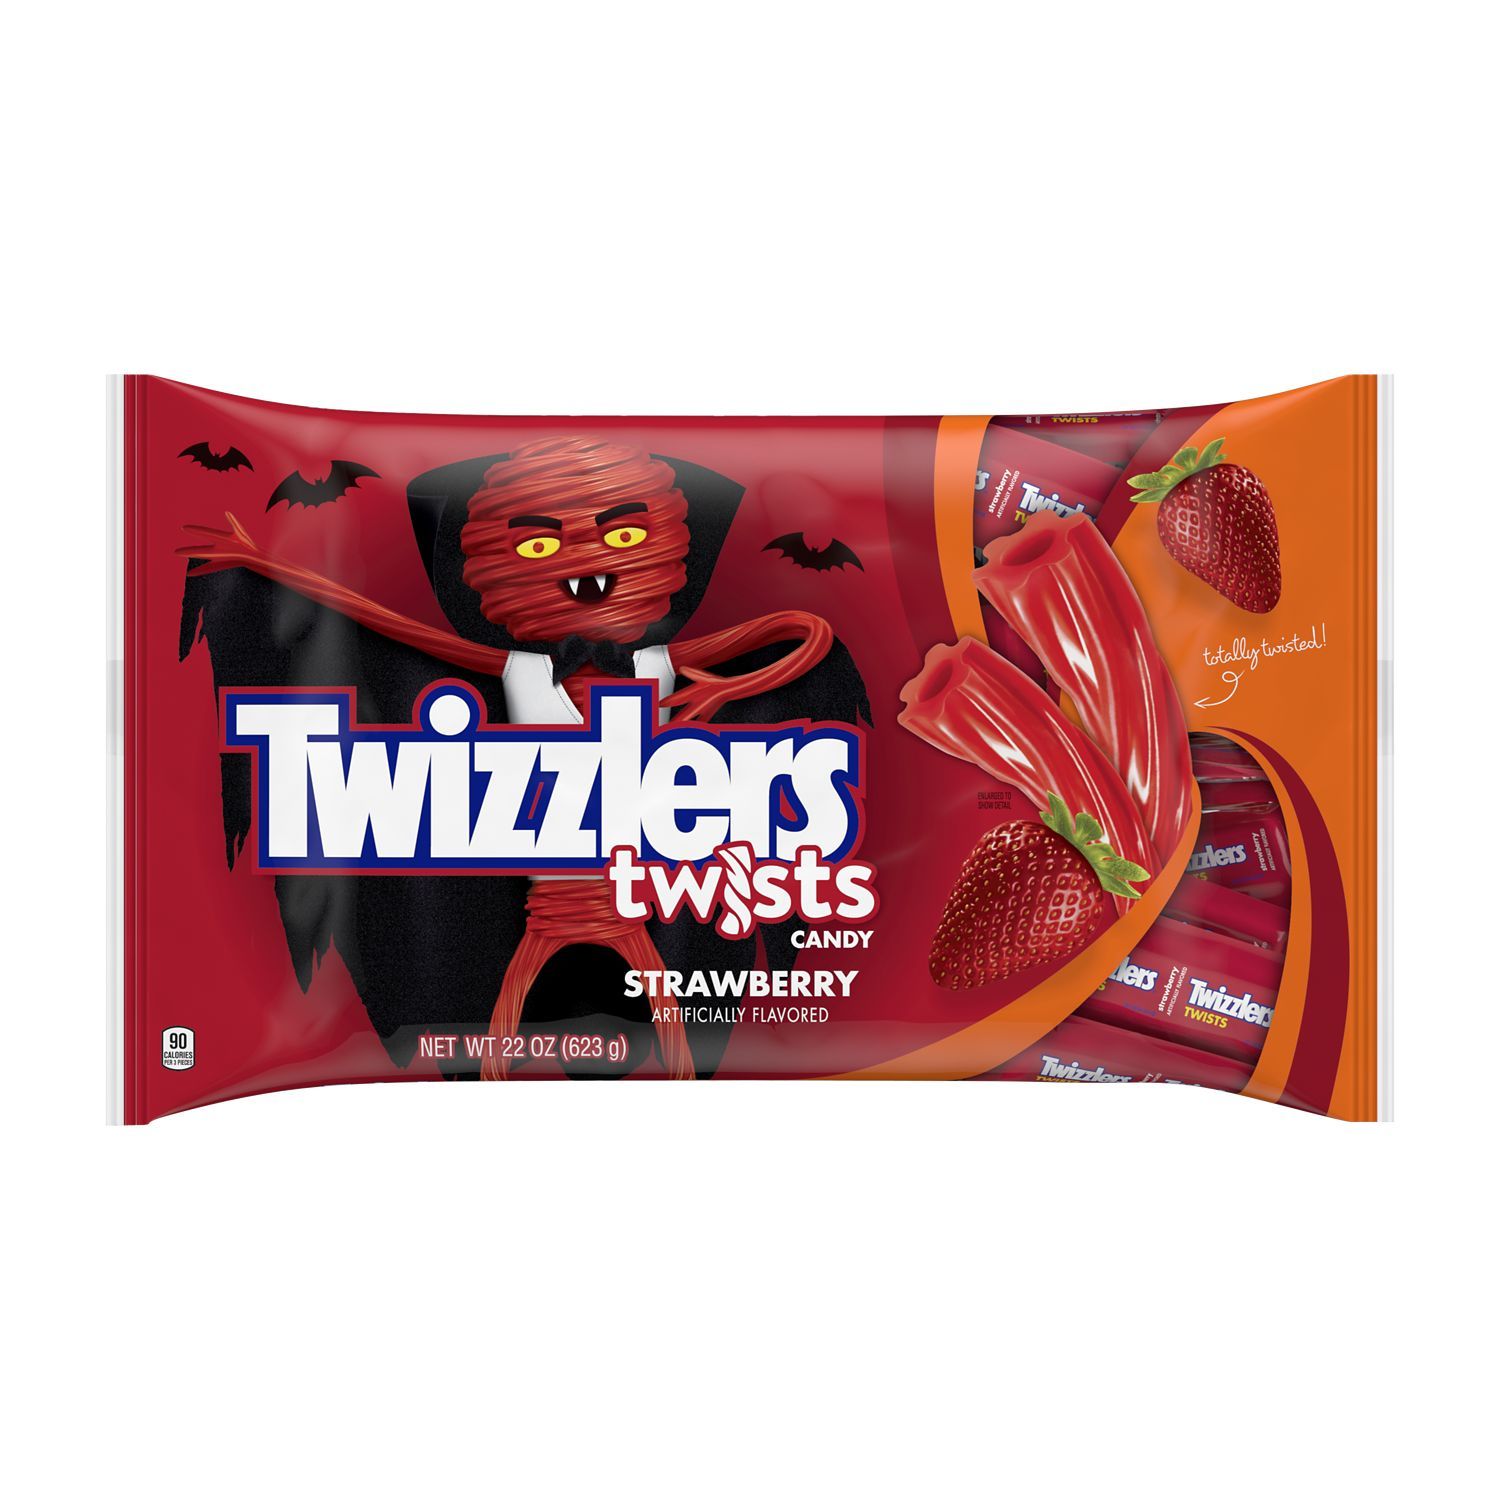 Twizzlers Snack Size (individually wrapped) 22oz at CVS $2.99